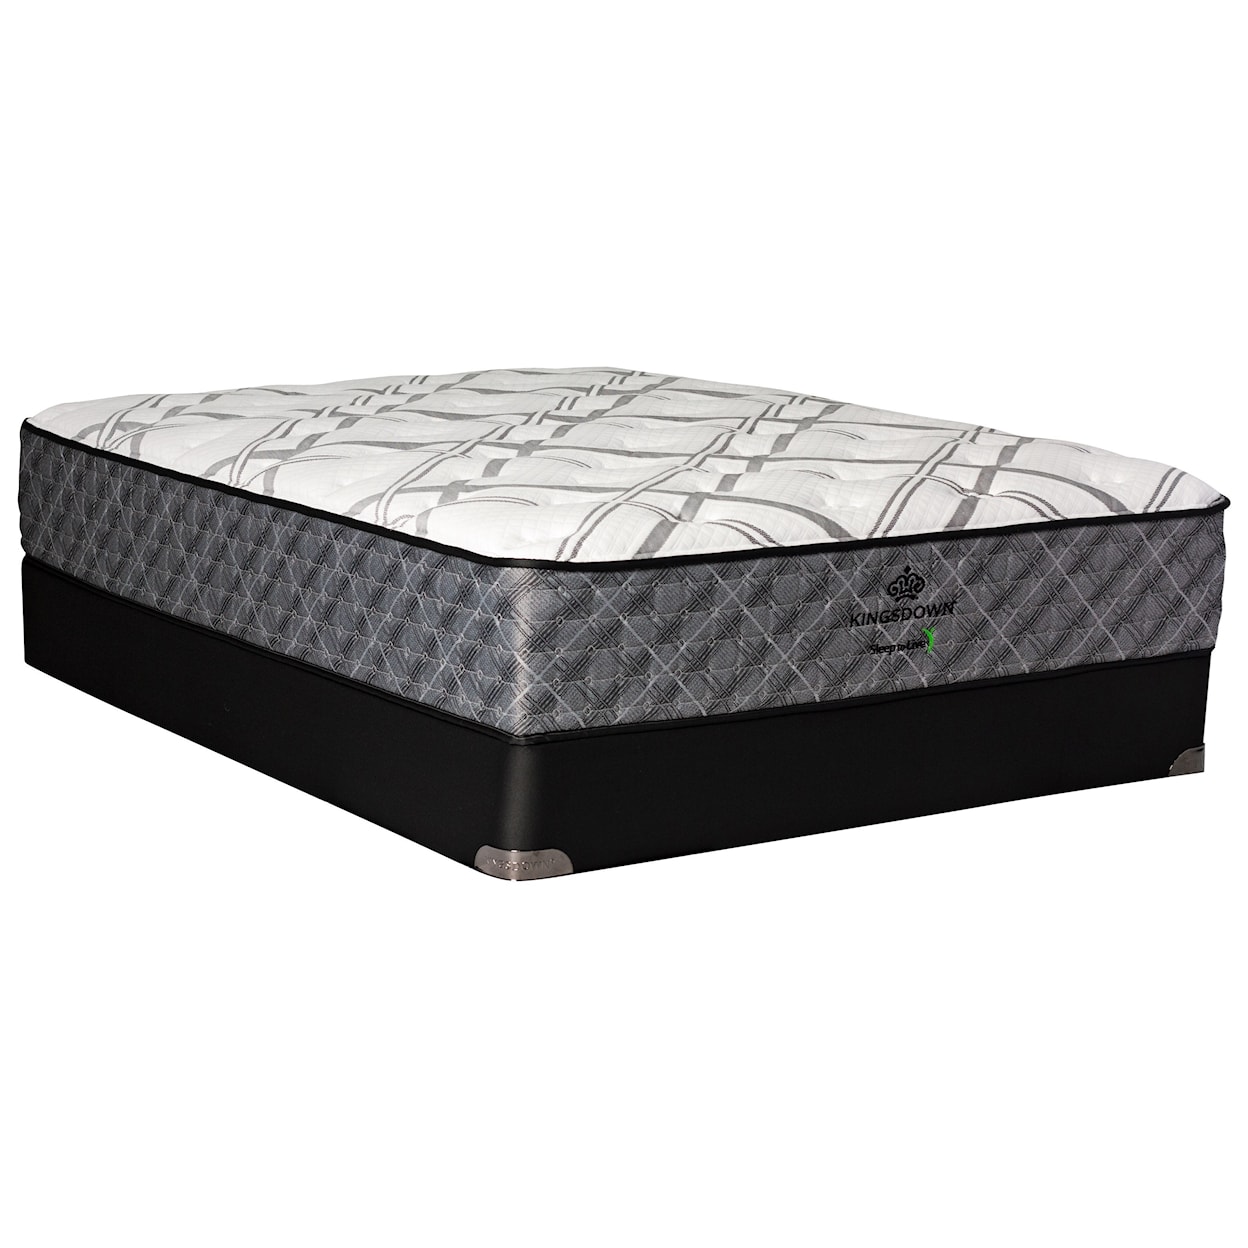 Kingsdown 6000 Series Euro Top Blue Red King Firm Coil on Coil Euro Top Mattress Set